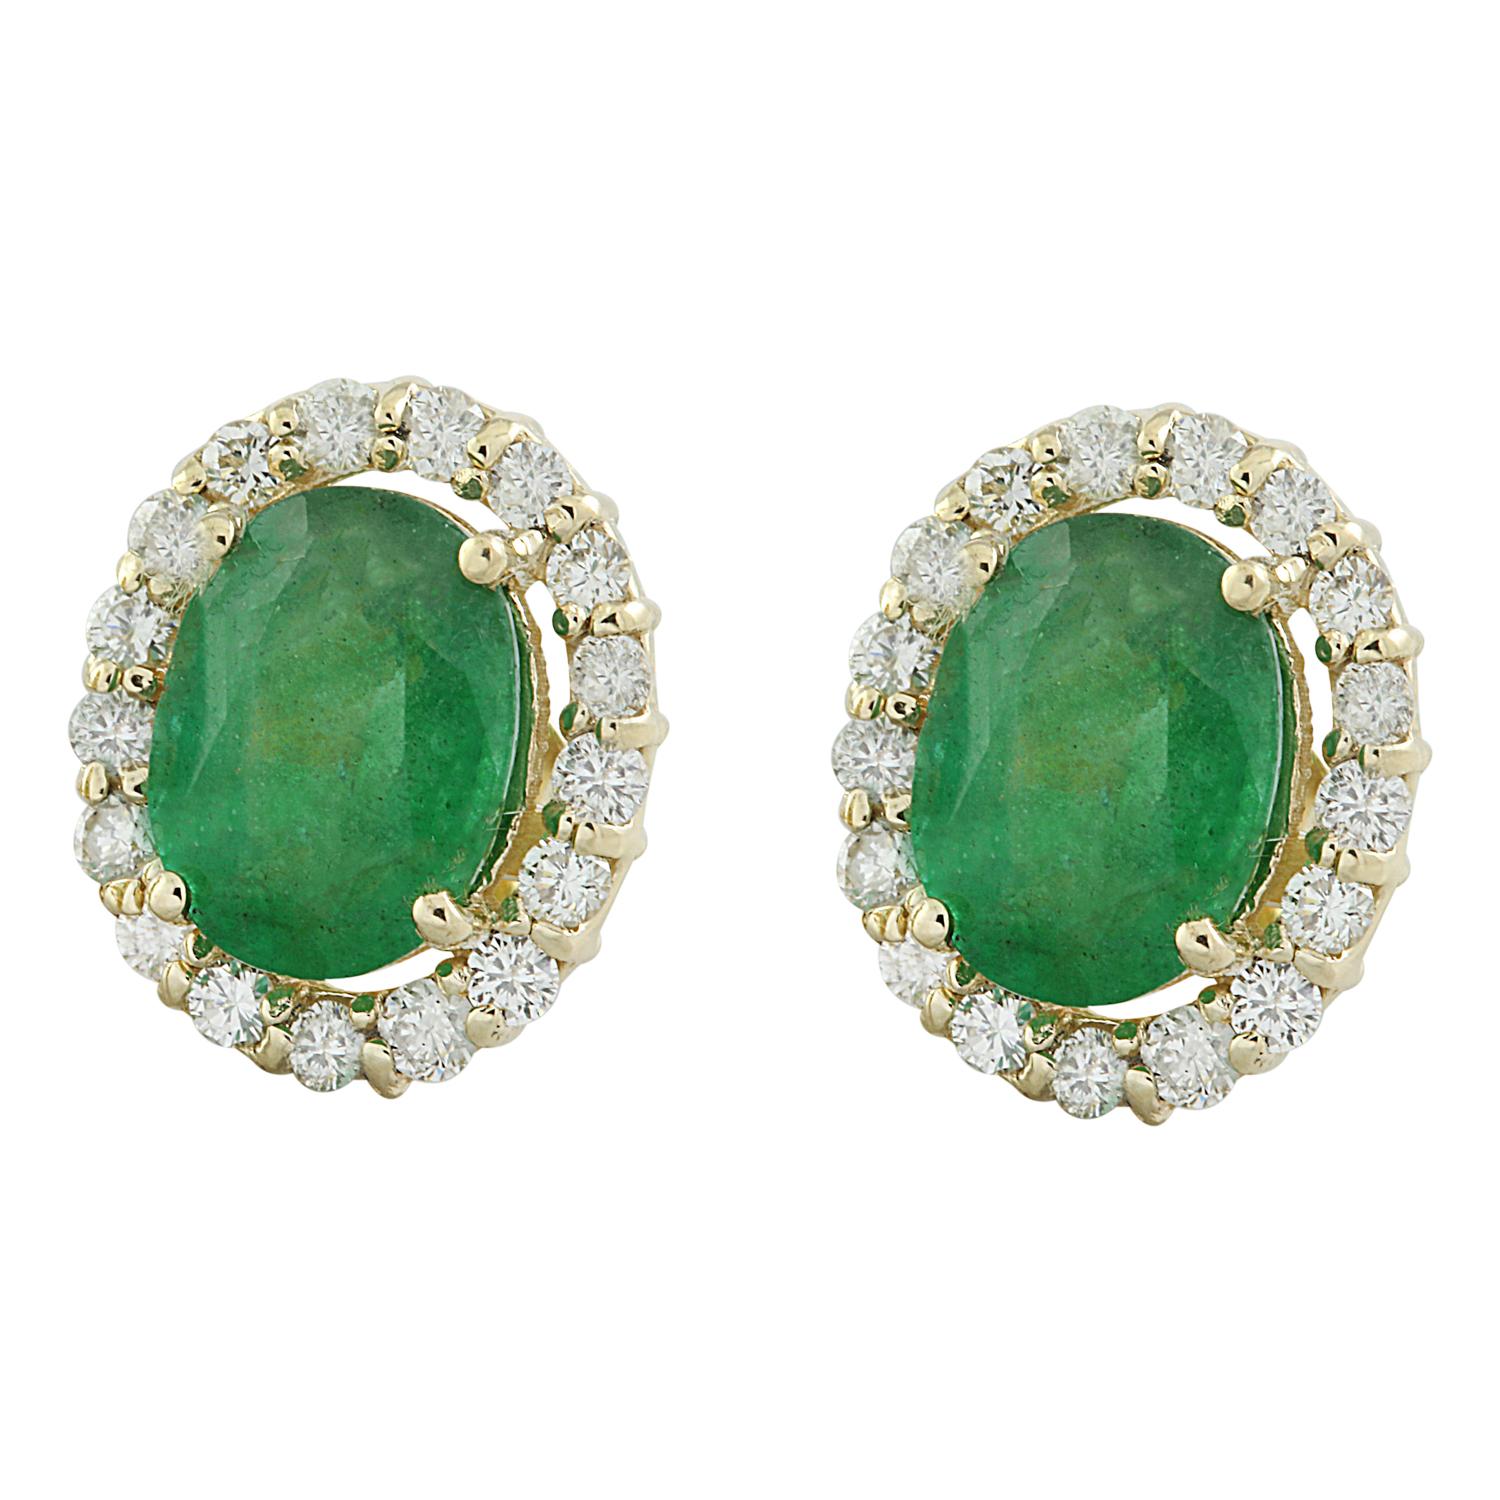 Introducing a mesmerizing pair of earrings that exude elegance and sophistication - the 4.70 Carat Natural Emerald 14 Karat Solid Yellow Gold Diamond Earrings. These earrings are a symbol of opulence and refinement.

Crafted to perfection, these